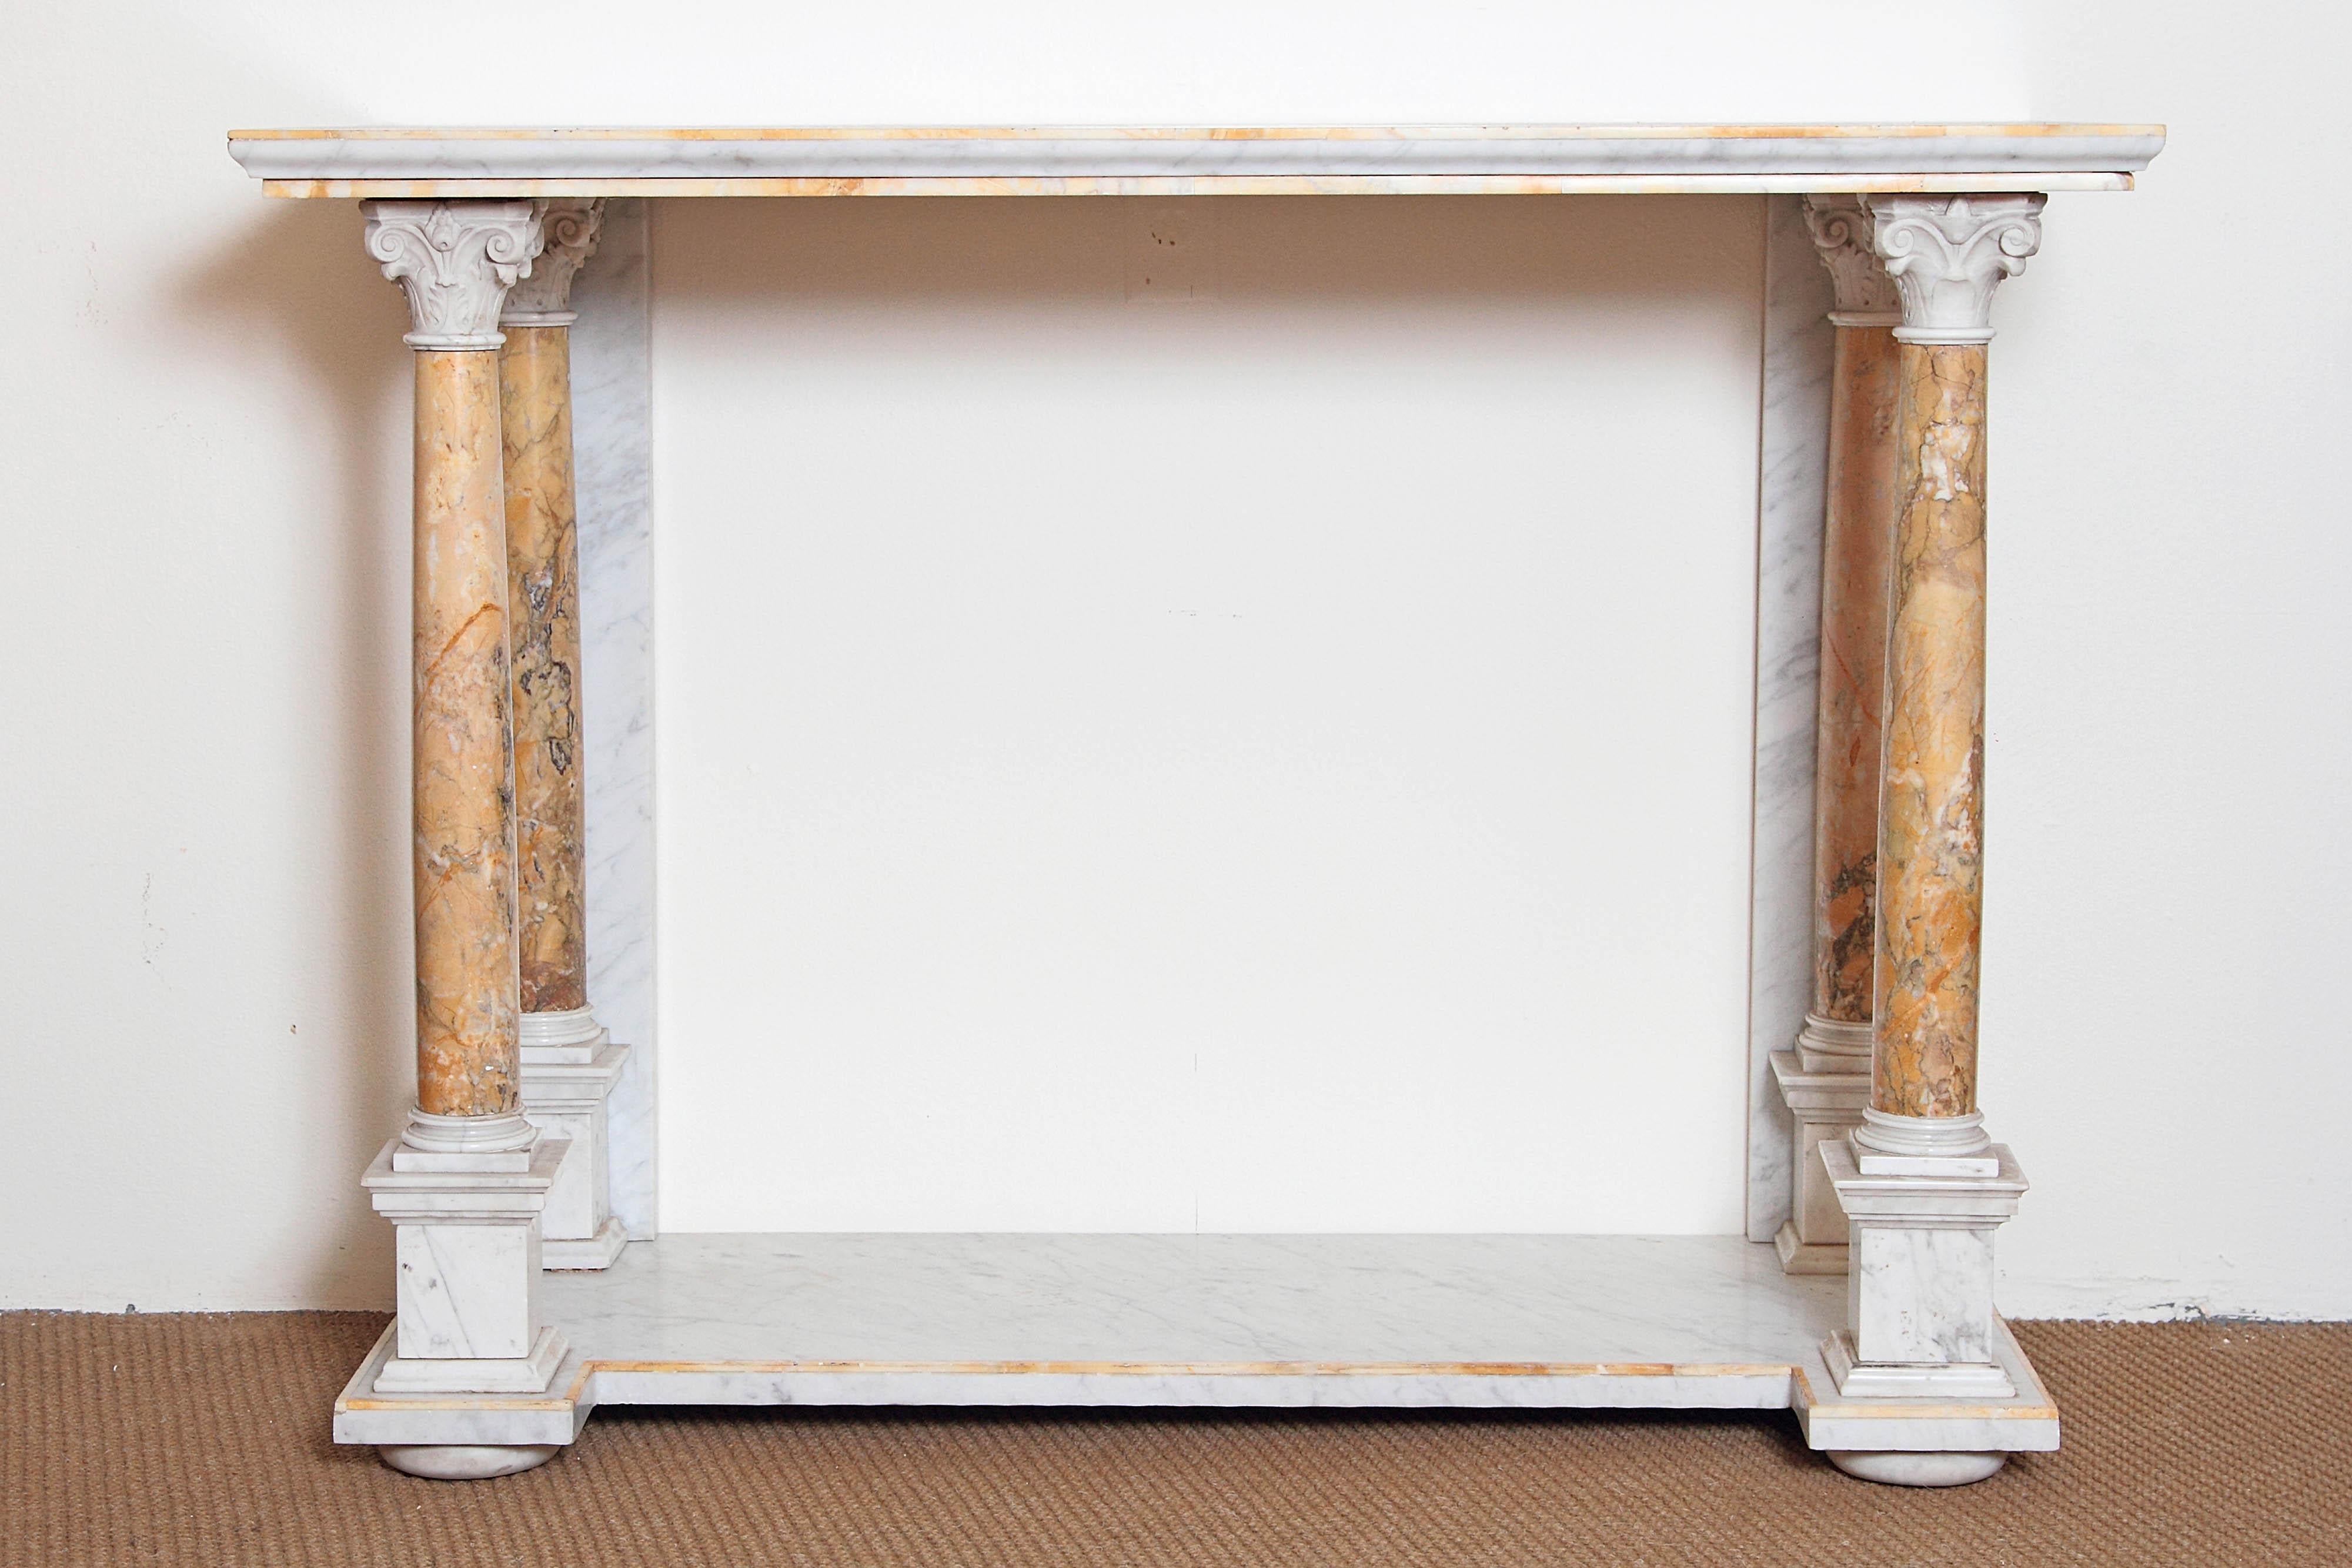 A stately marble console table. Top of white marble with 1/4 inch trim of tan marble. Four round beige marble columns with elaborate white capitals and bases set on lower shelf. The table comes apart into several pieces, early 19th century, Italy.